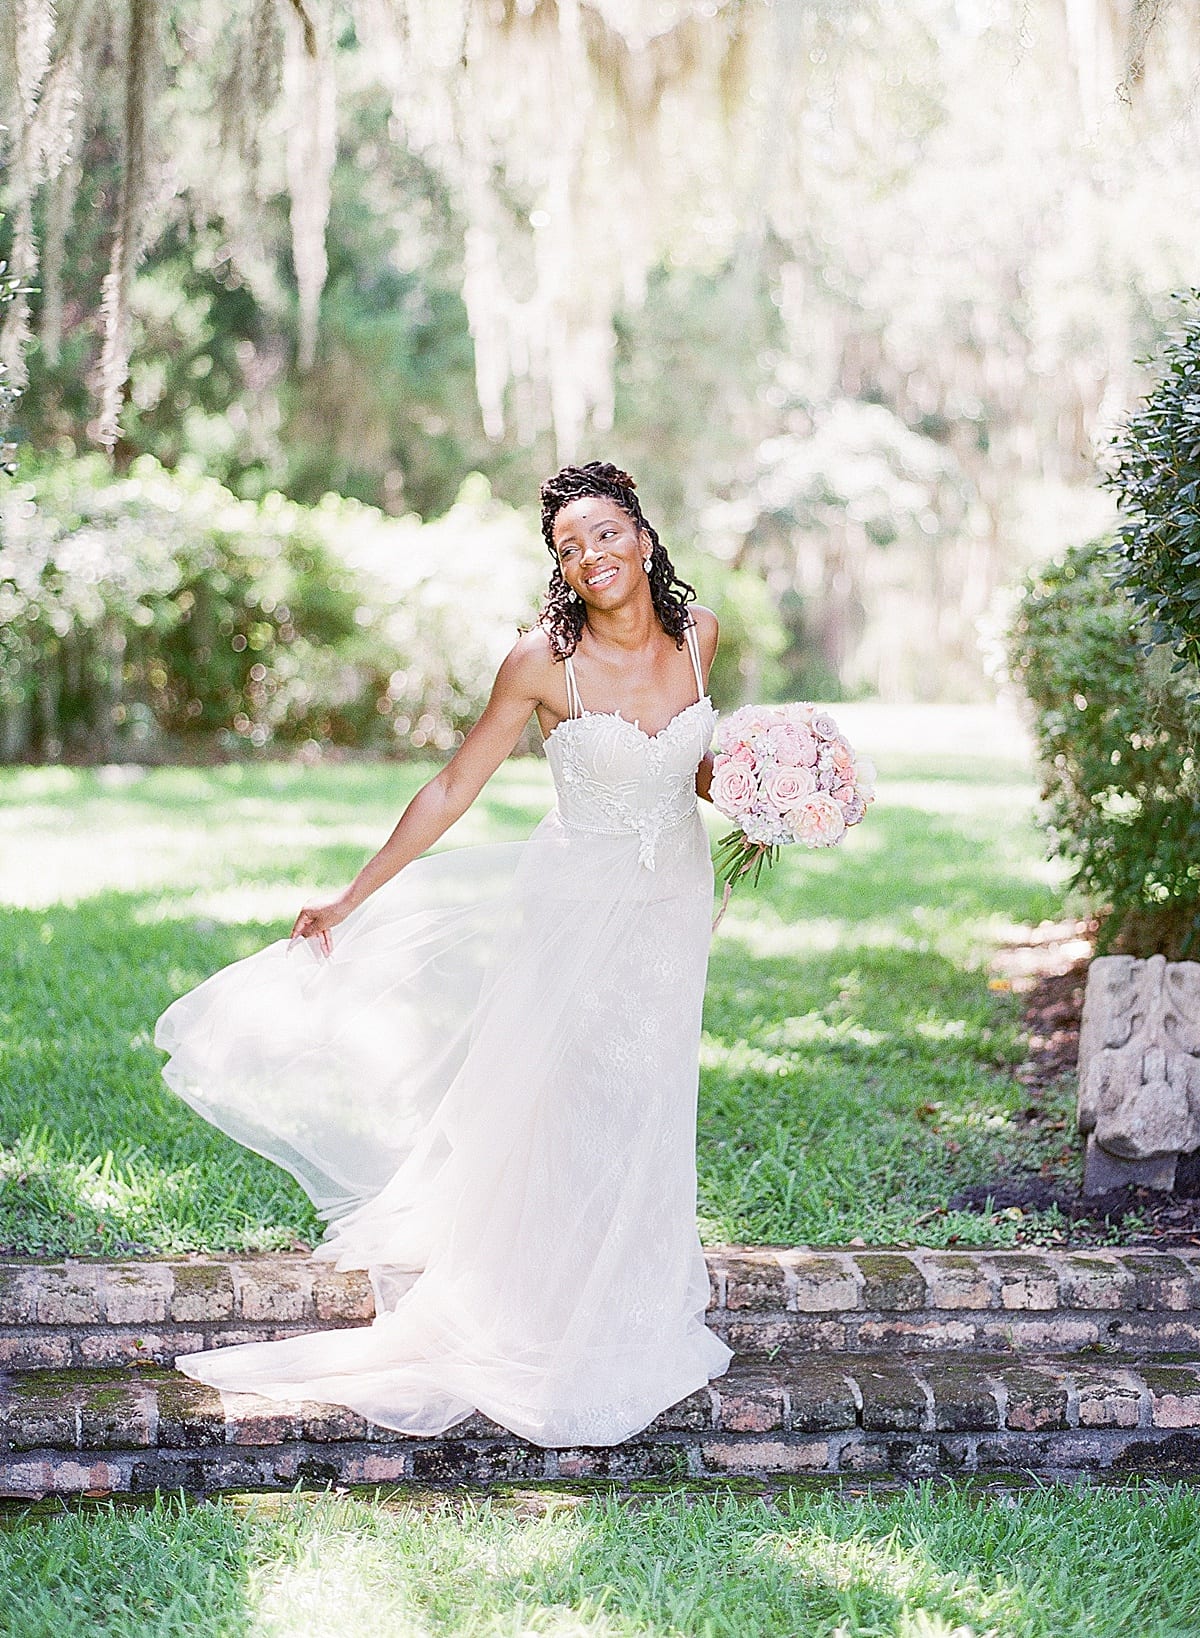 Bride Laughing On Steps Holding Dress and Bouquet Photo 